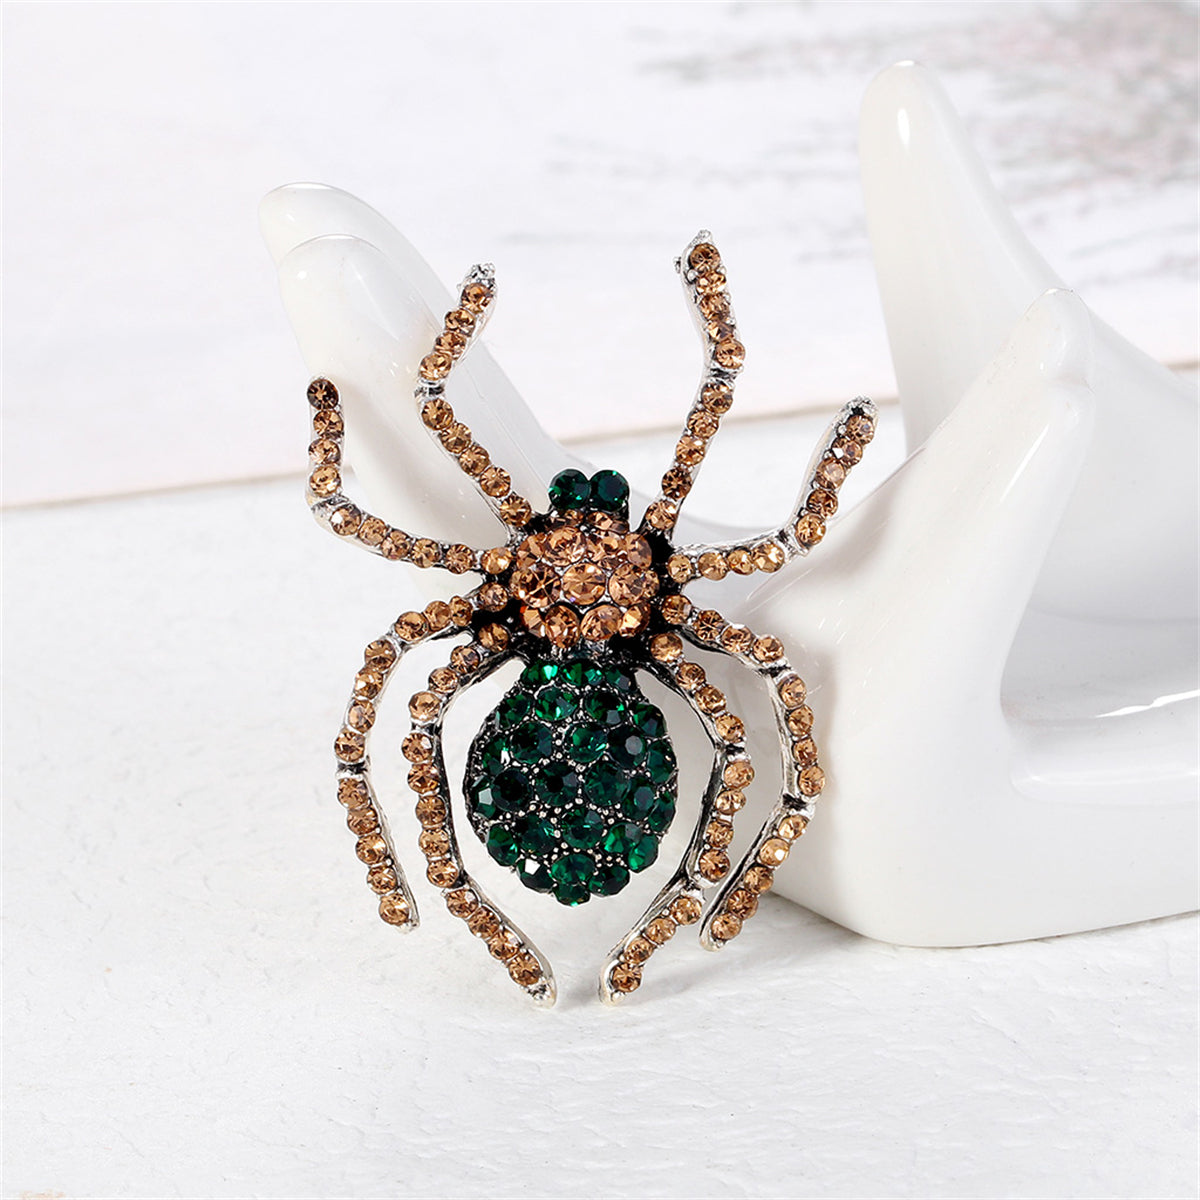 Green Cubic Zirconia & Silver-Plated Spider Brooch